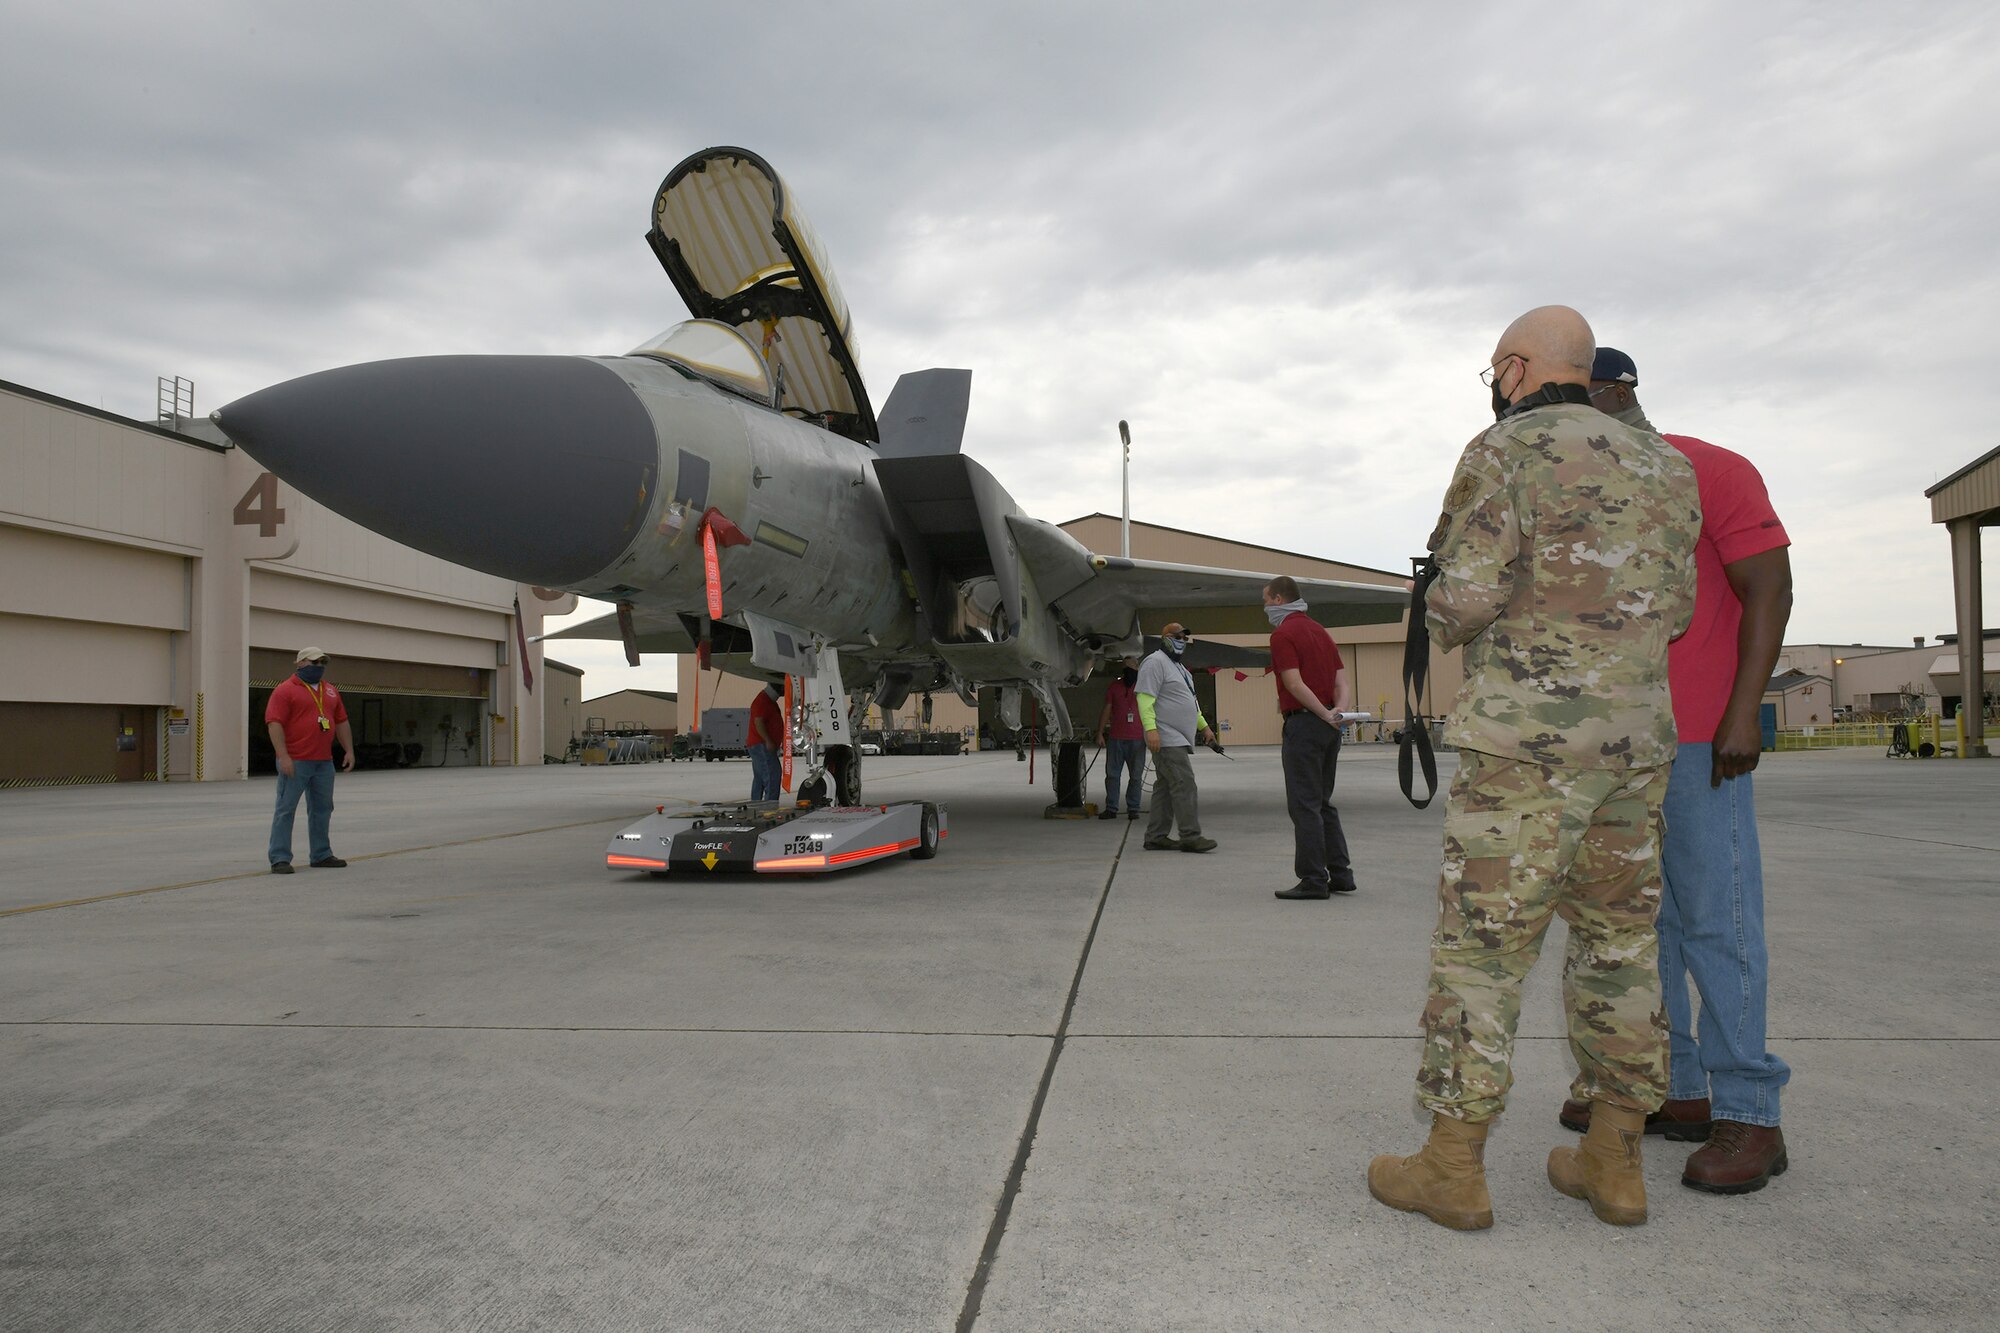 Photo shows a group of people around an F-15 aircraft which has a machine hooked up to the front wheel to direct the aircraft into place.